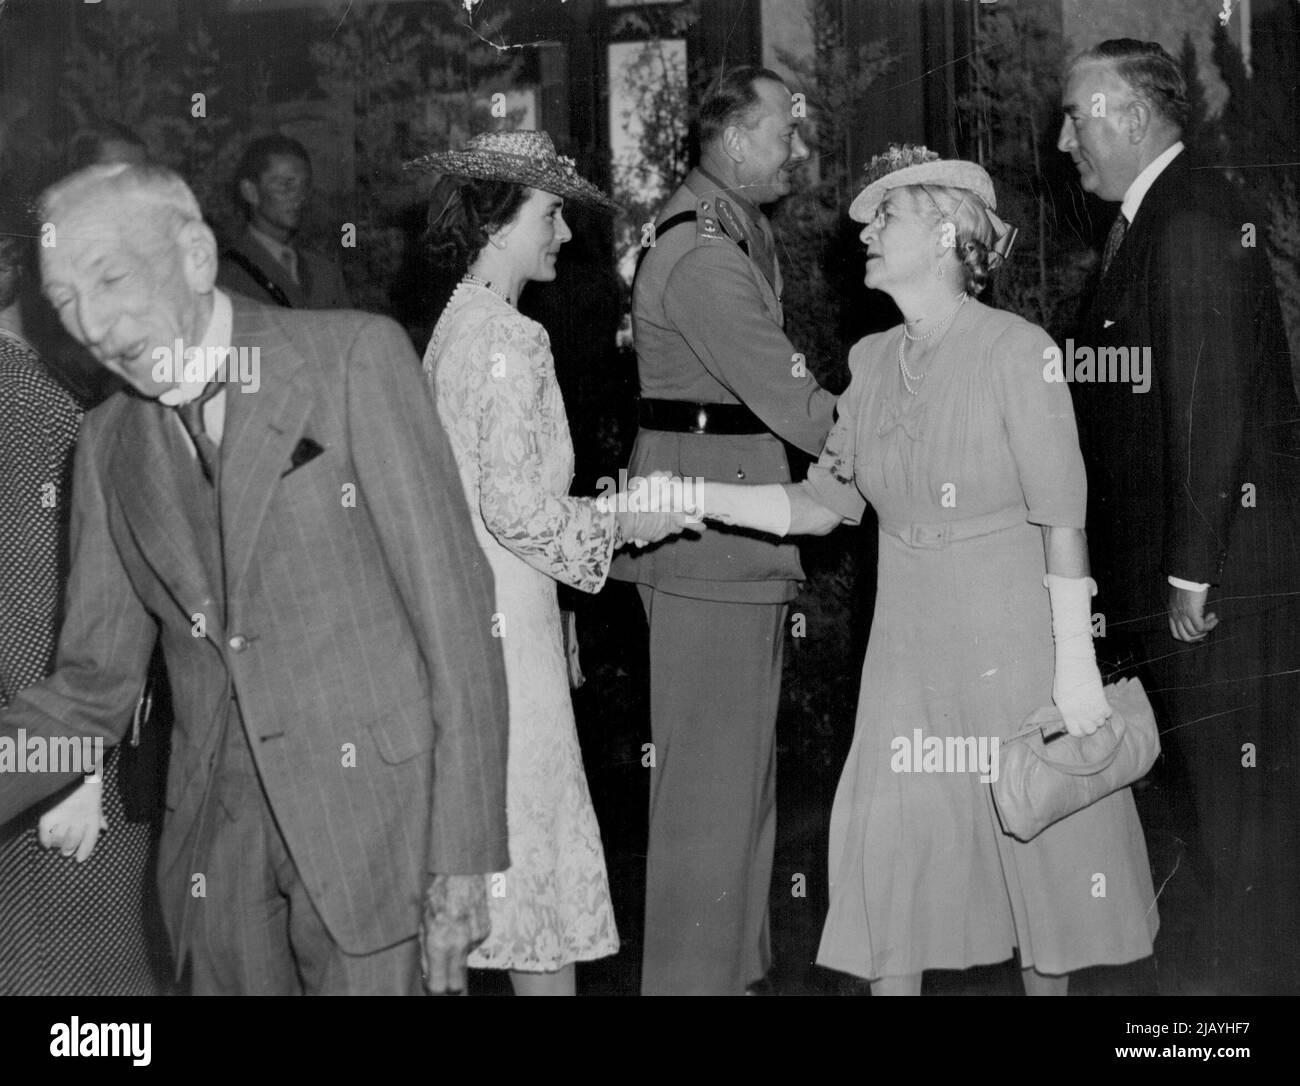 The vice-regal couple at an Australian reception. From left, Mr. W.M. Hughes, the Duchess and Duke, Dame Mary Hughes and Mr. R.G. Menzines. February 5, 1945. Stock Photo